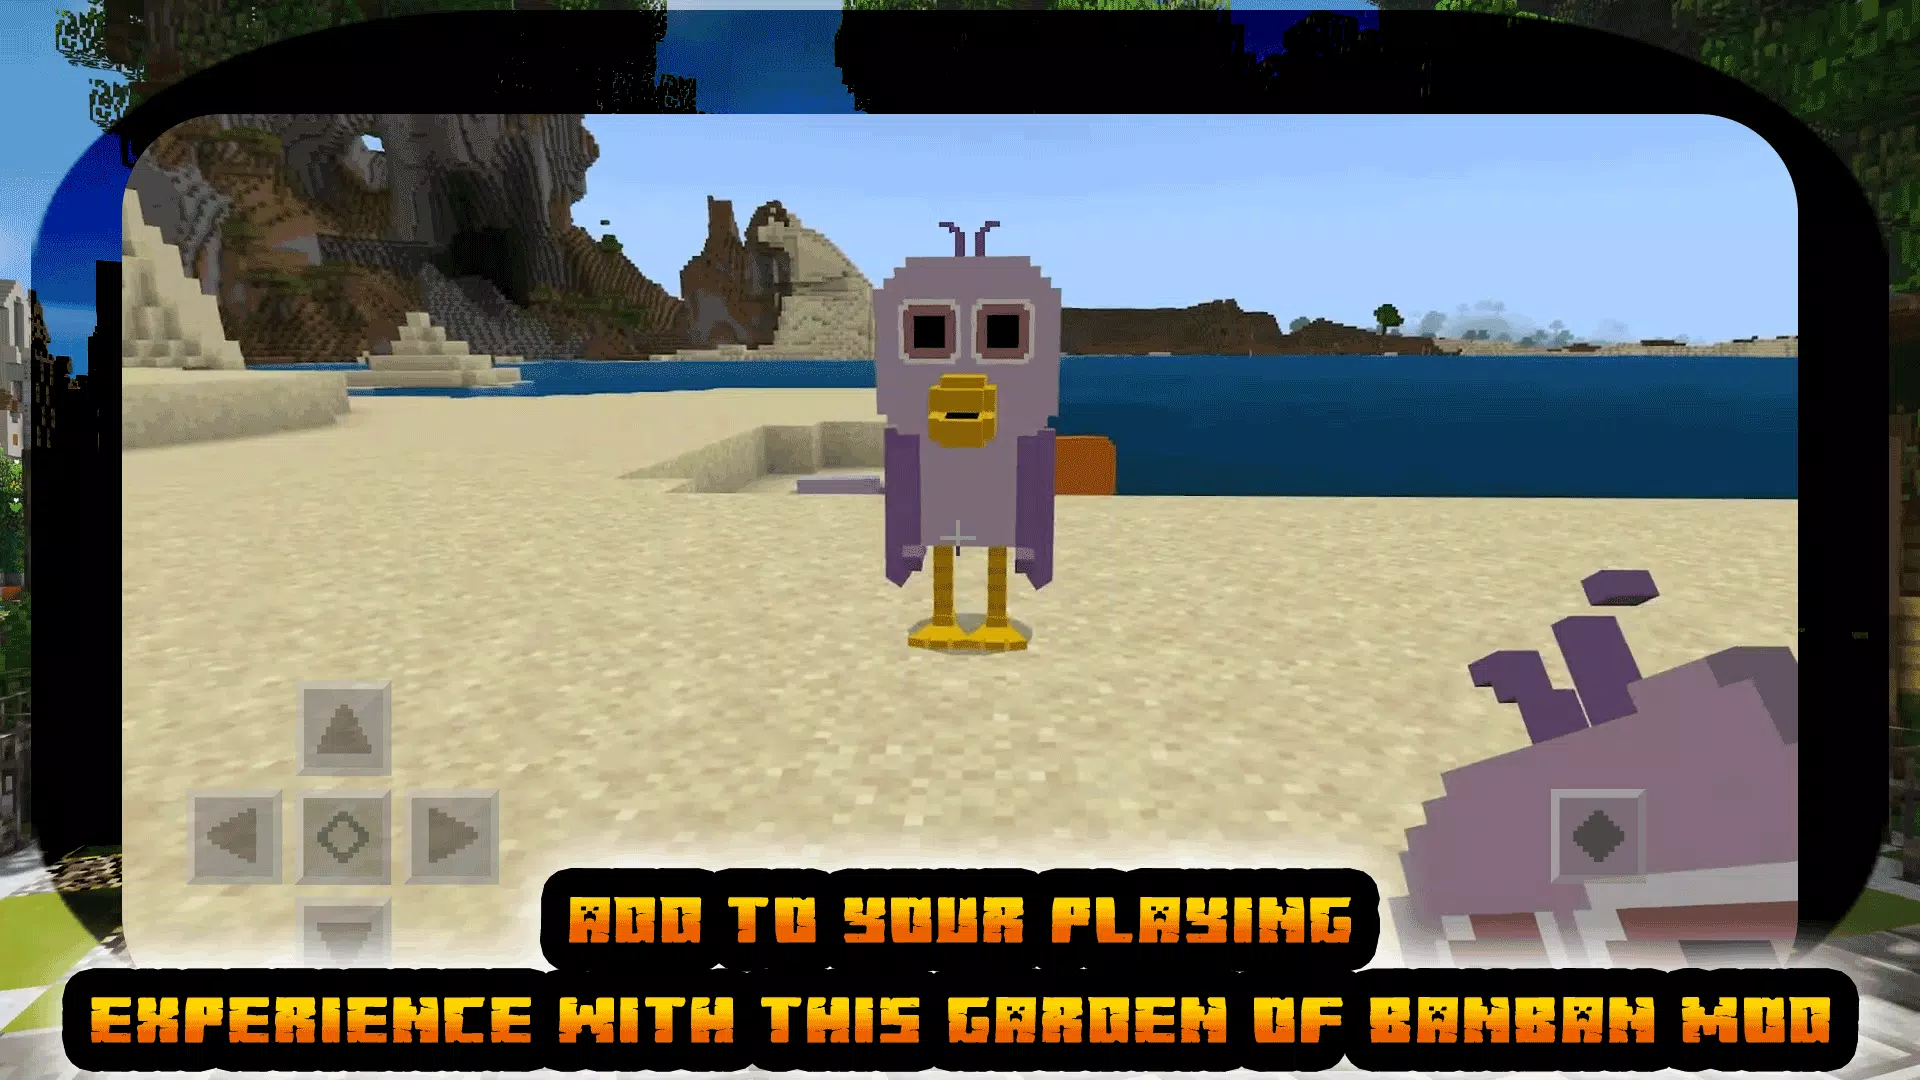 Garten of Banban 3 Add-on Mcpe for Android - Download